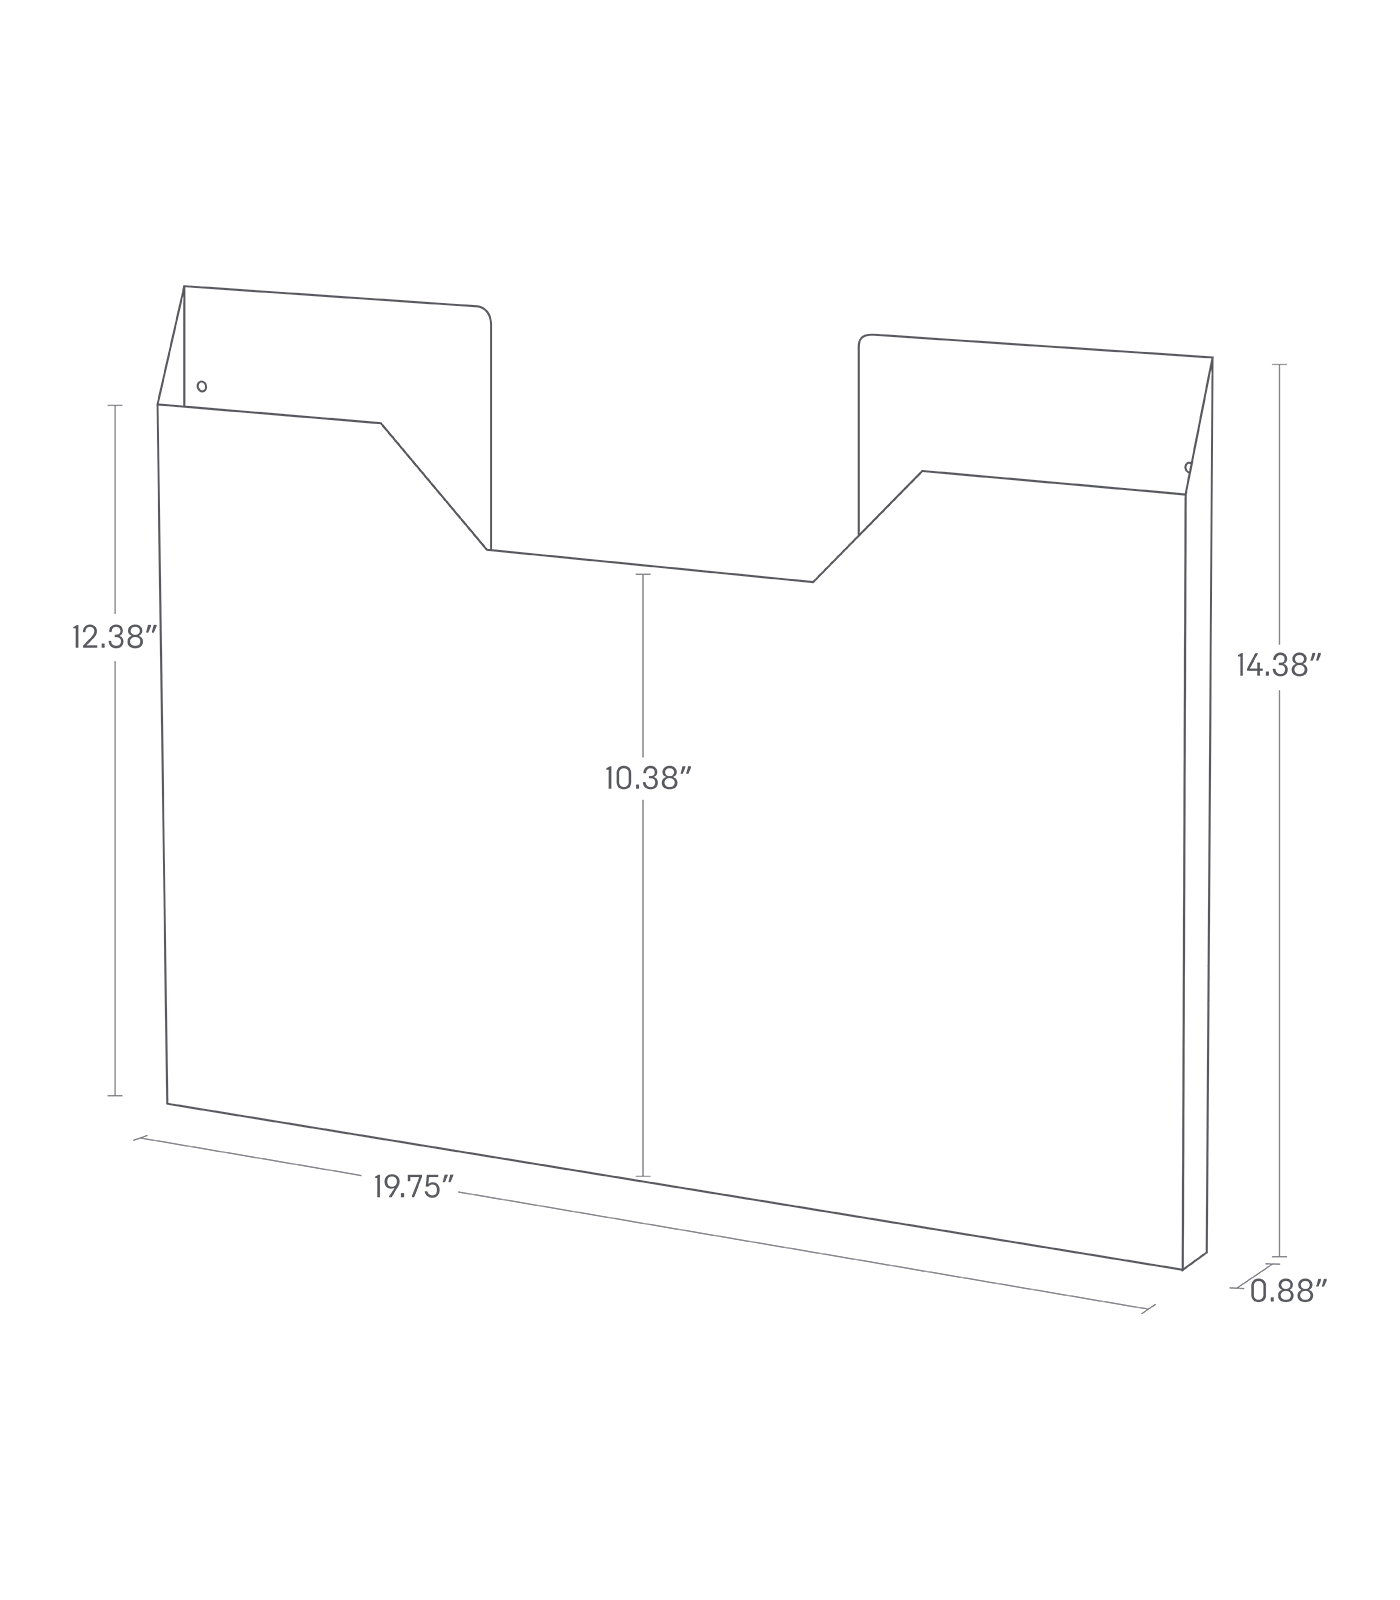 Dimension image for Magnetic Placemat Organizer showing total height of 17